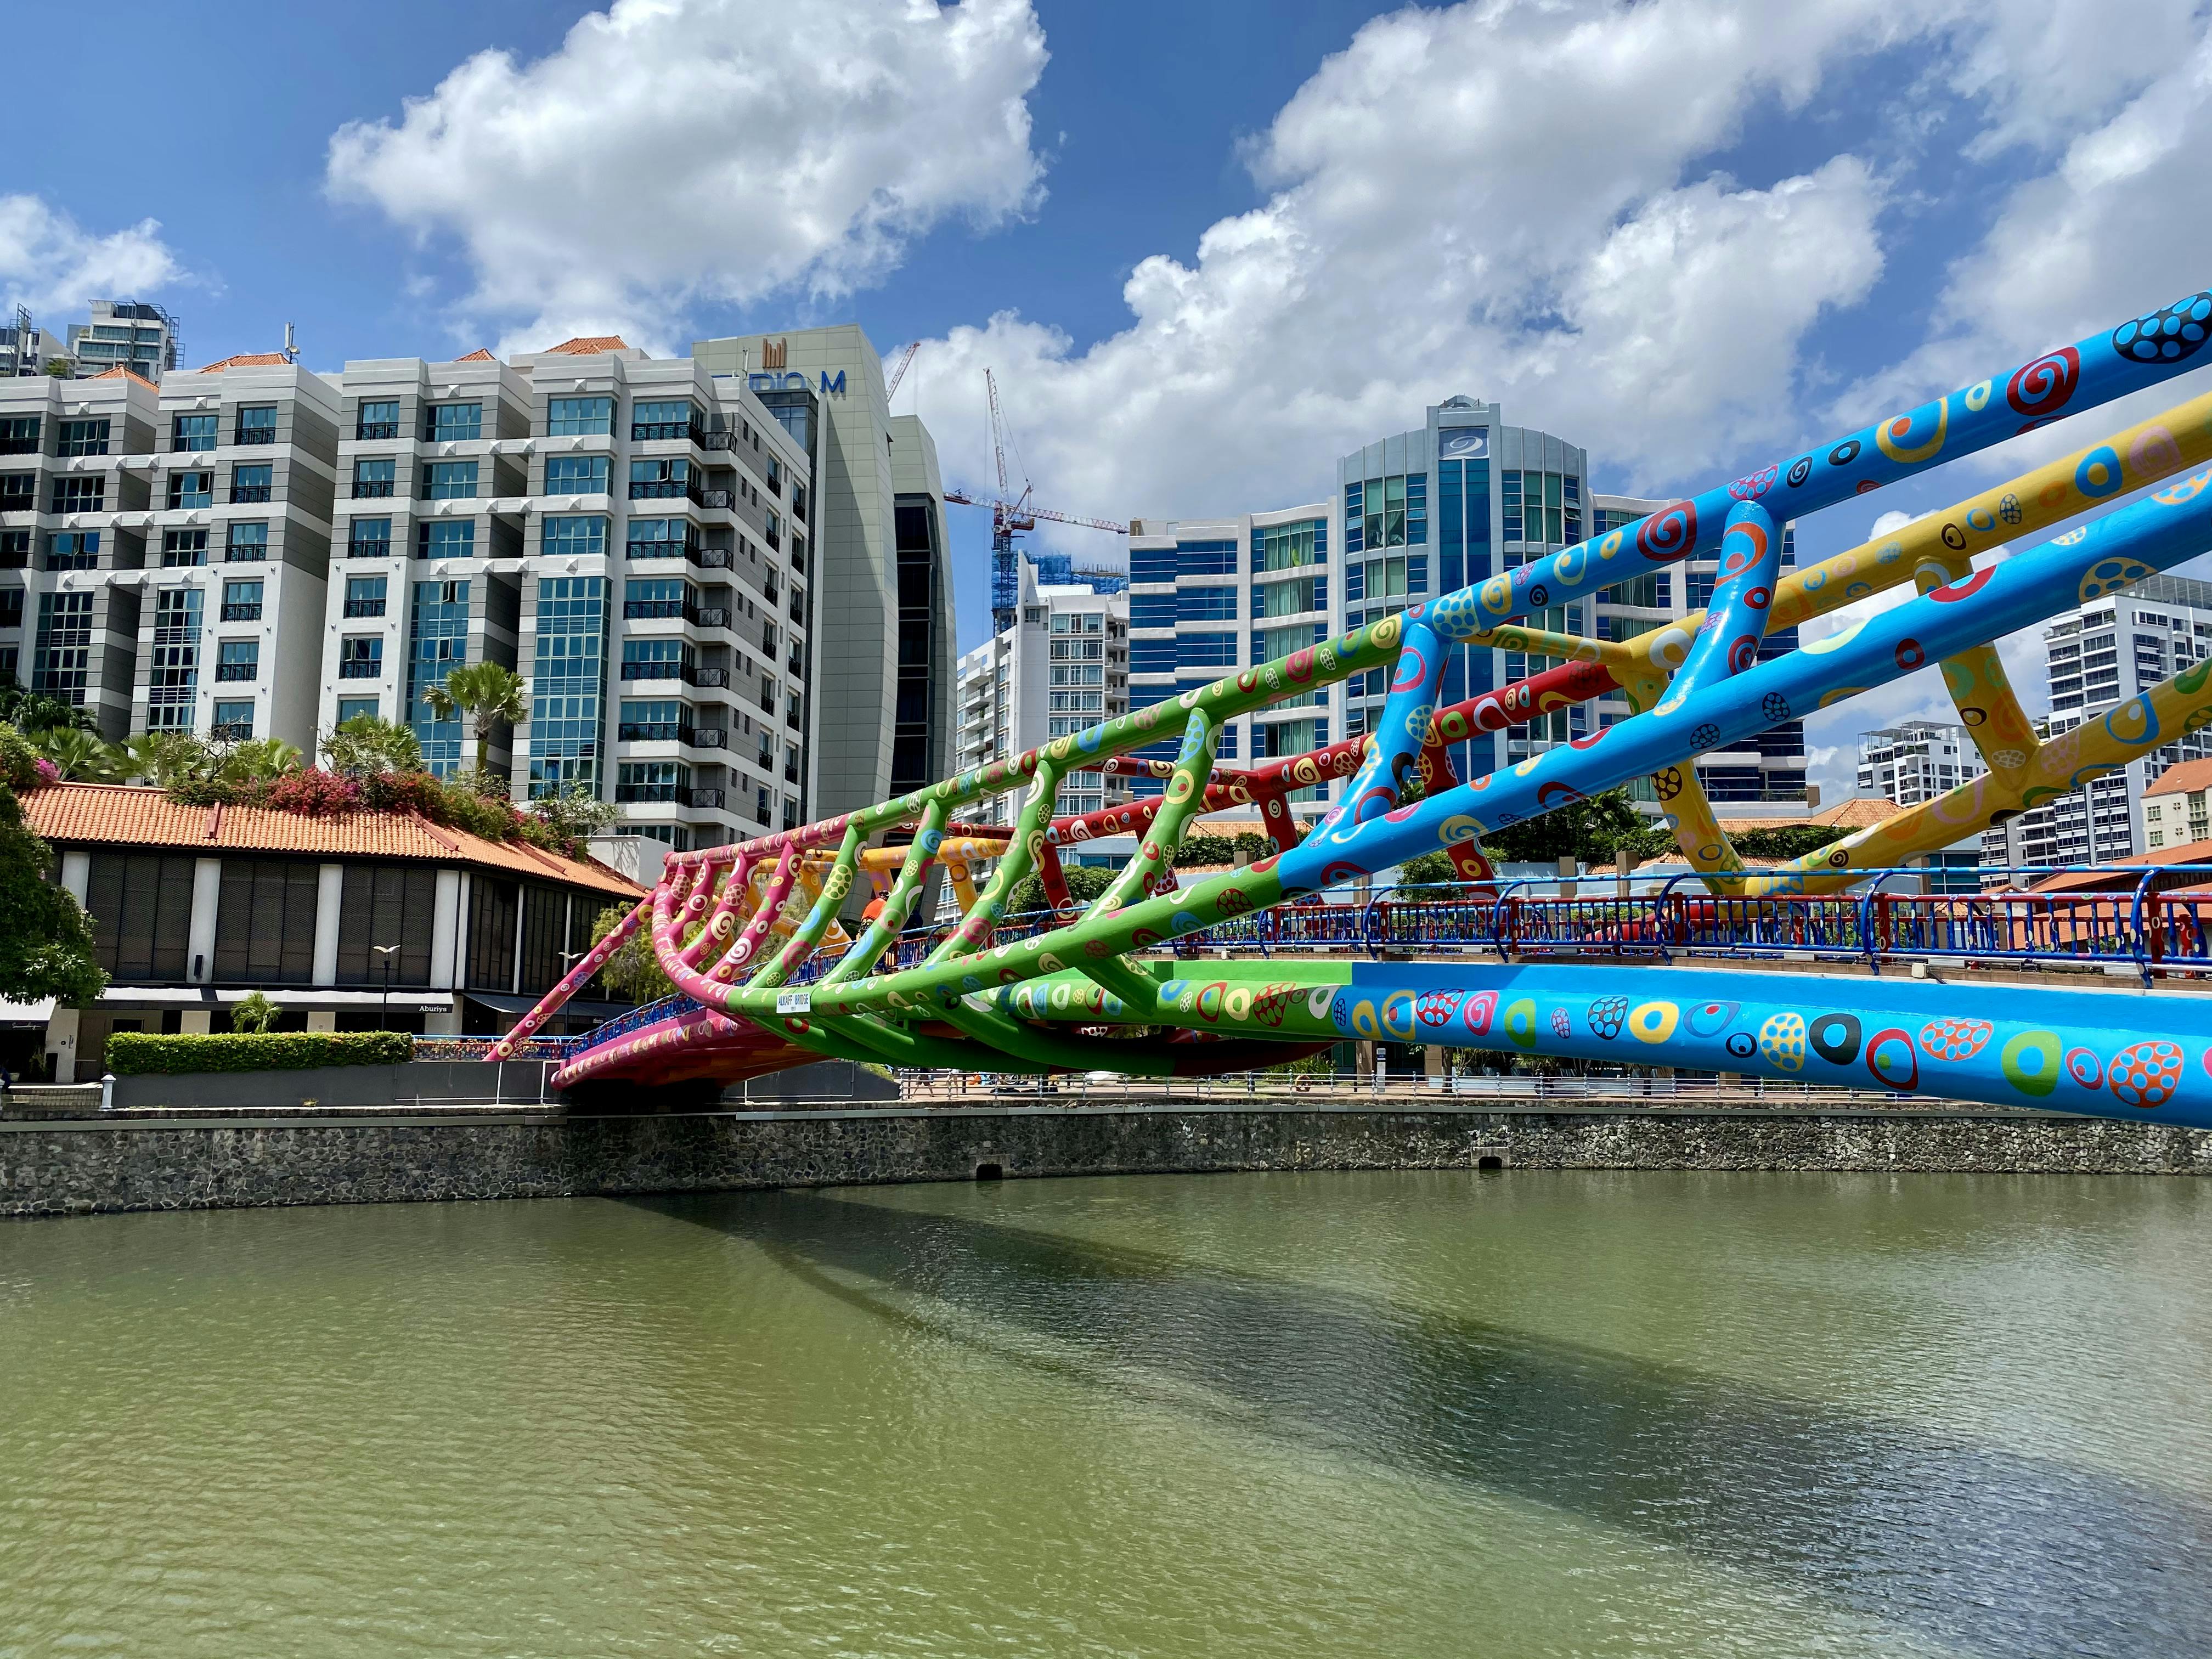 A bridge on the Singapore river in Robertson Quay